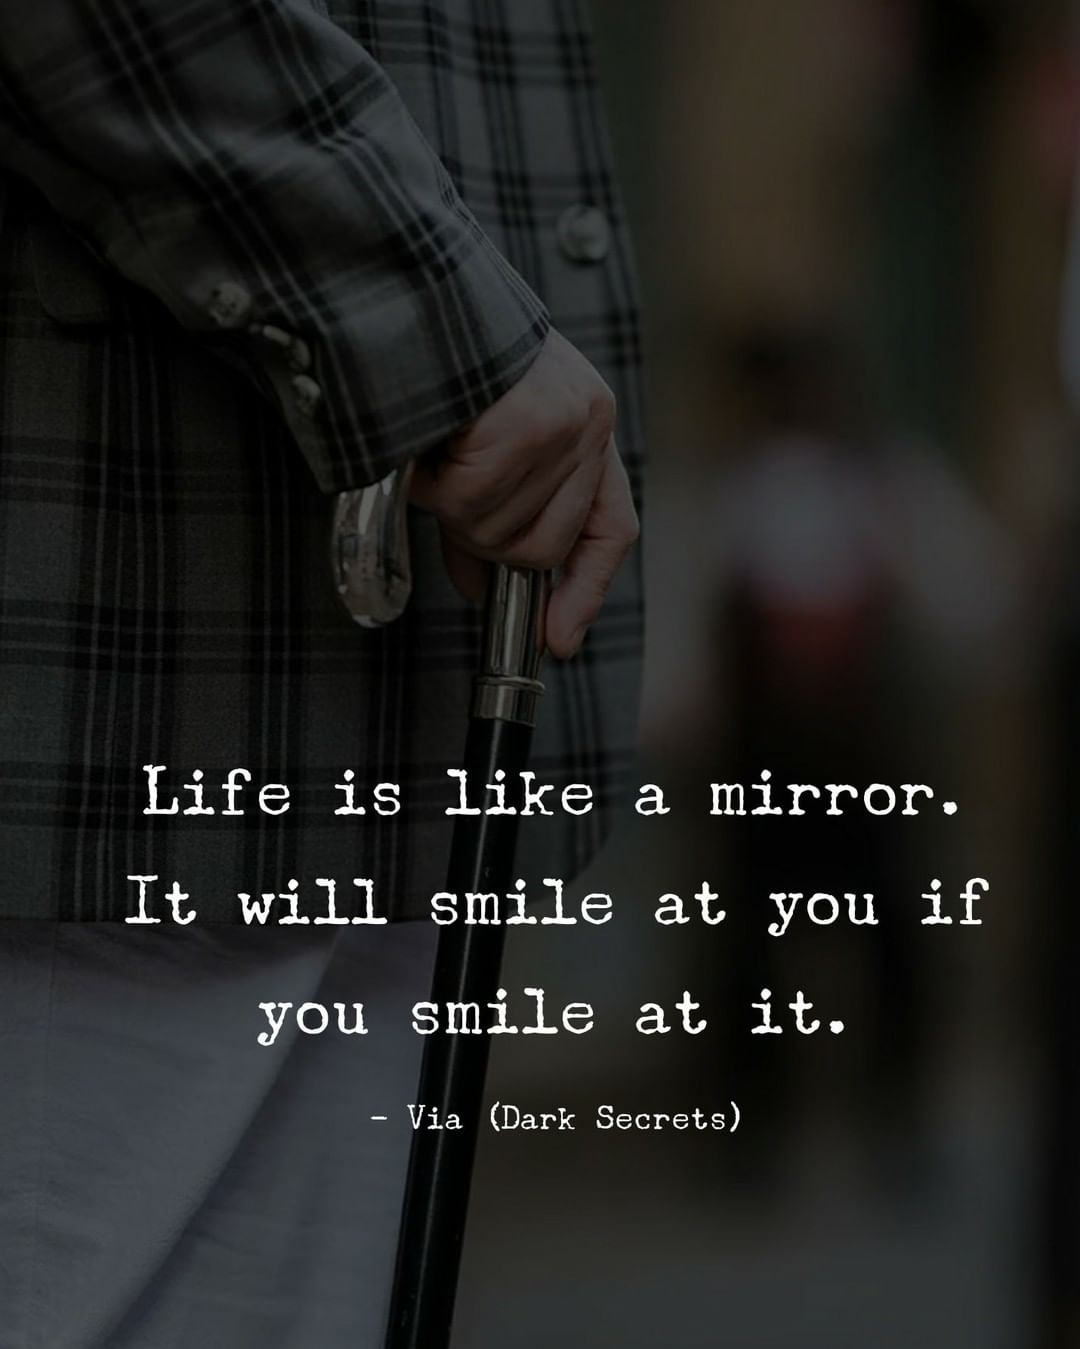 Life is like a mirror. It will smile at you if you smile at it.